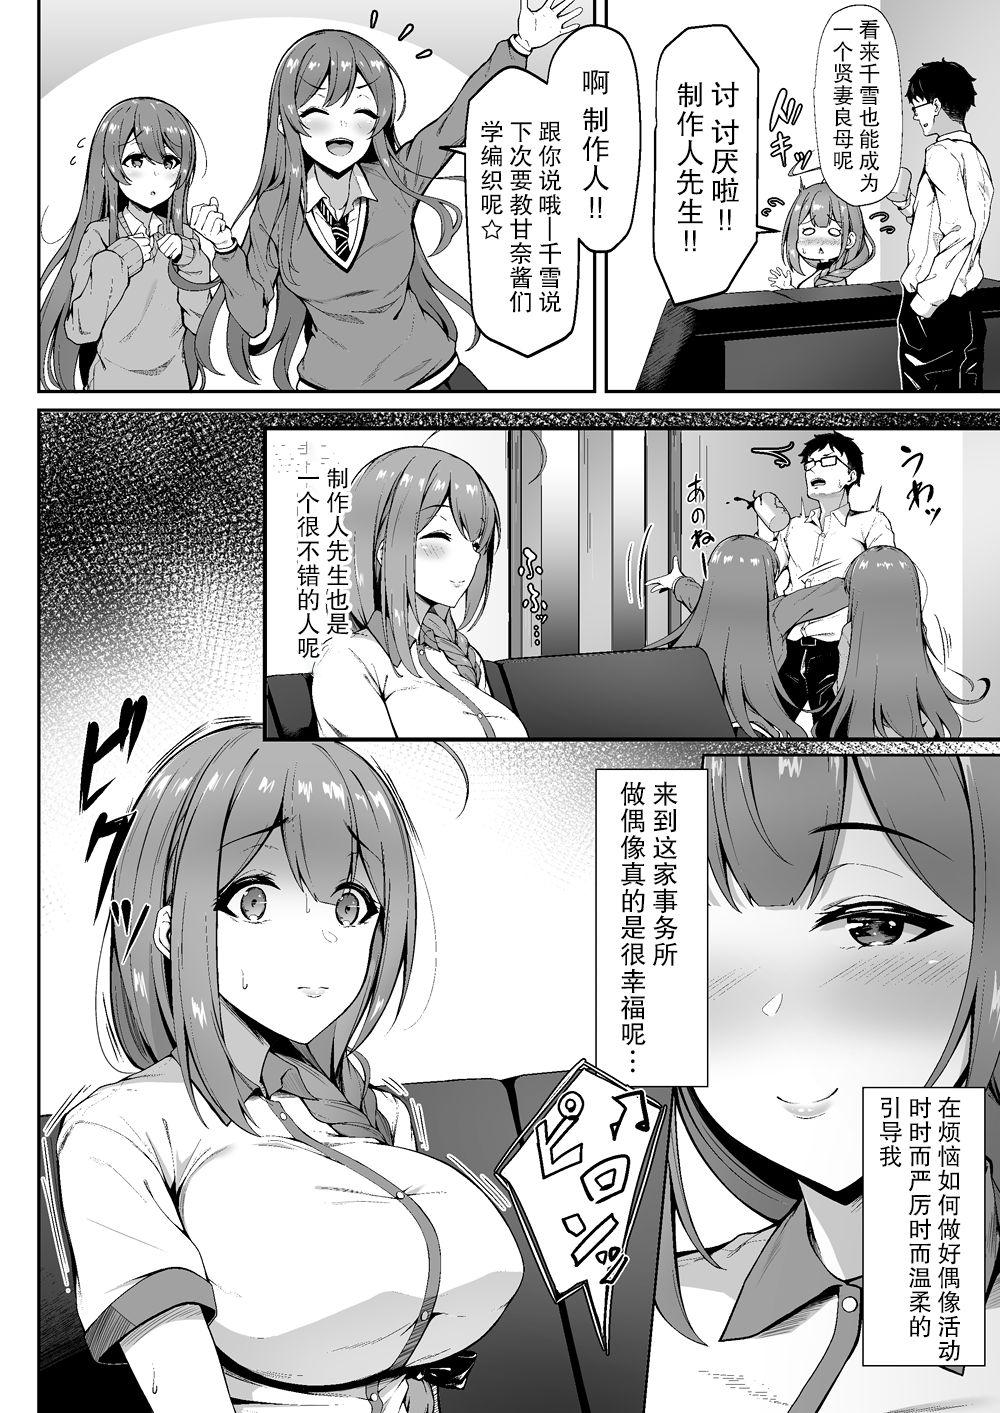 Orgia Chiru Out - The idolmaster Pounded - Page 6